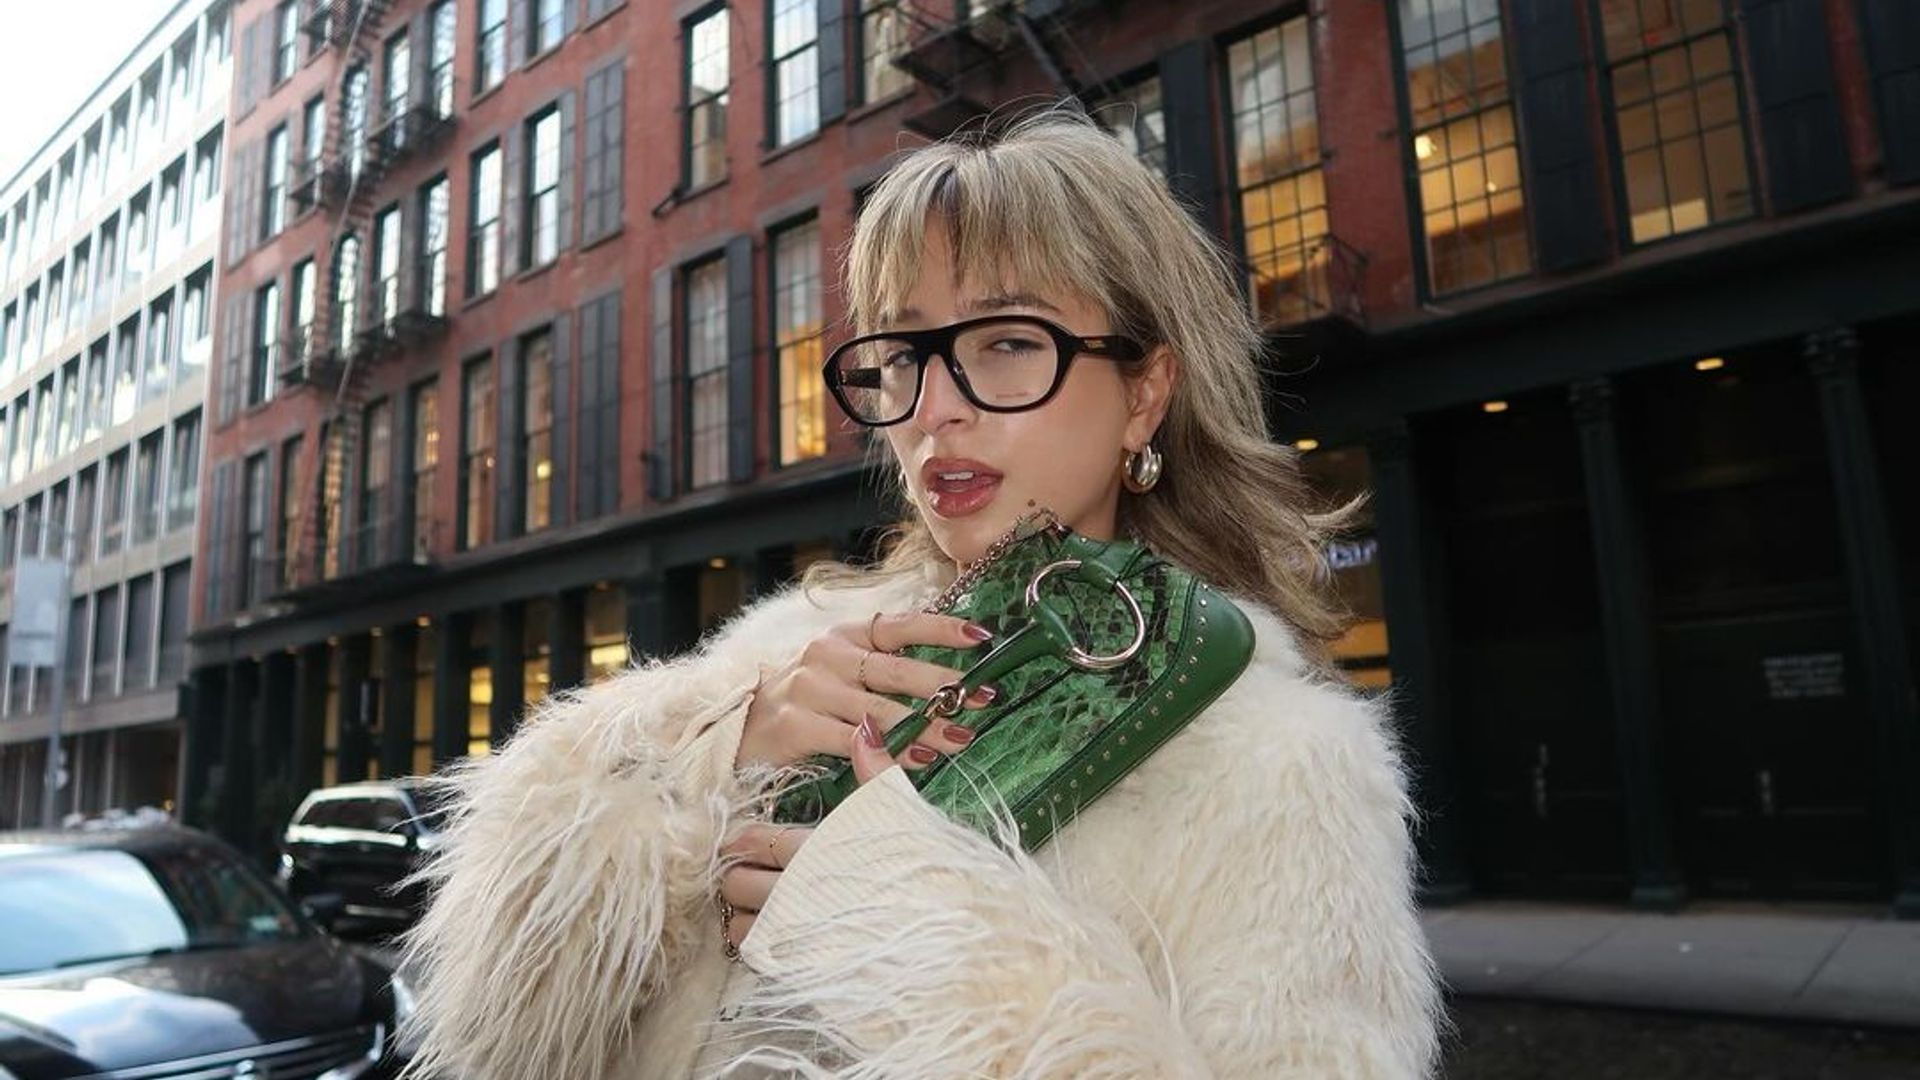 Influencer @izzipoopi poses with her green Gucci bag and transparent glasses in NYC